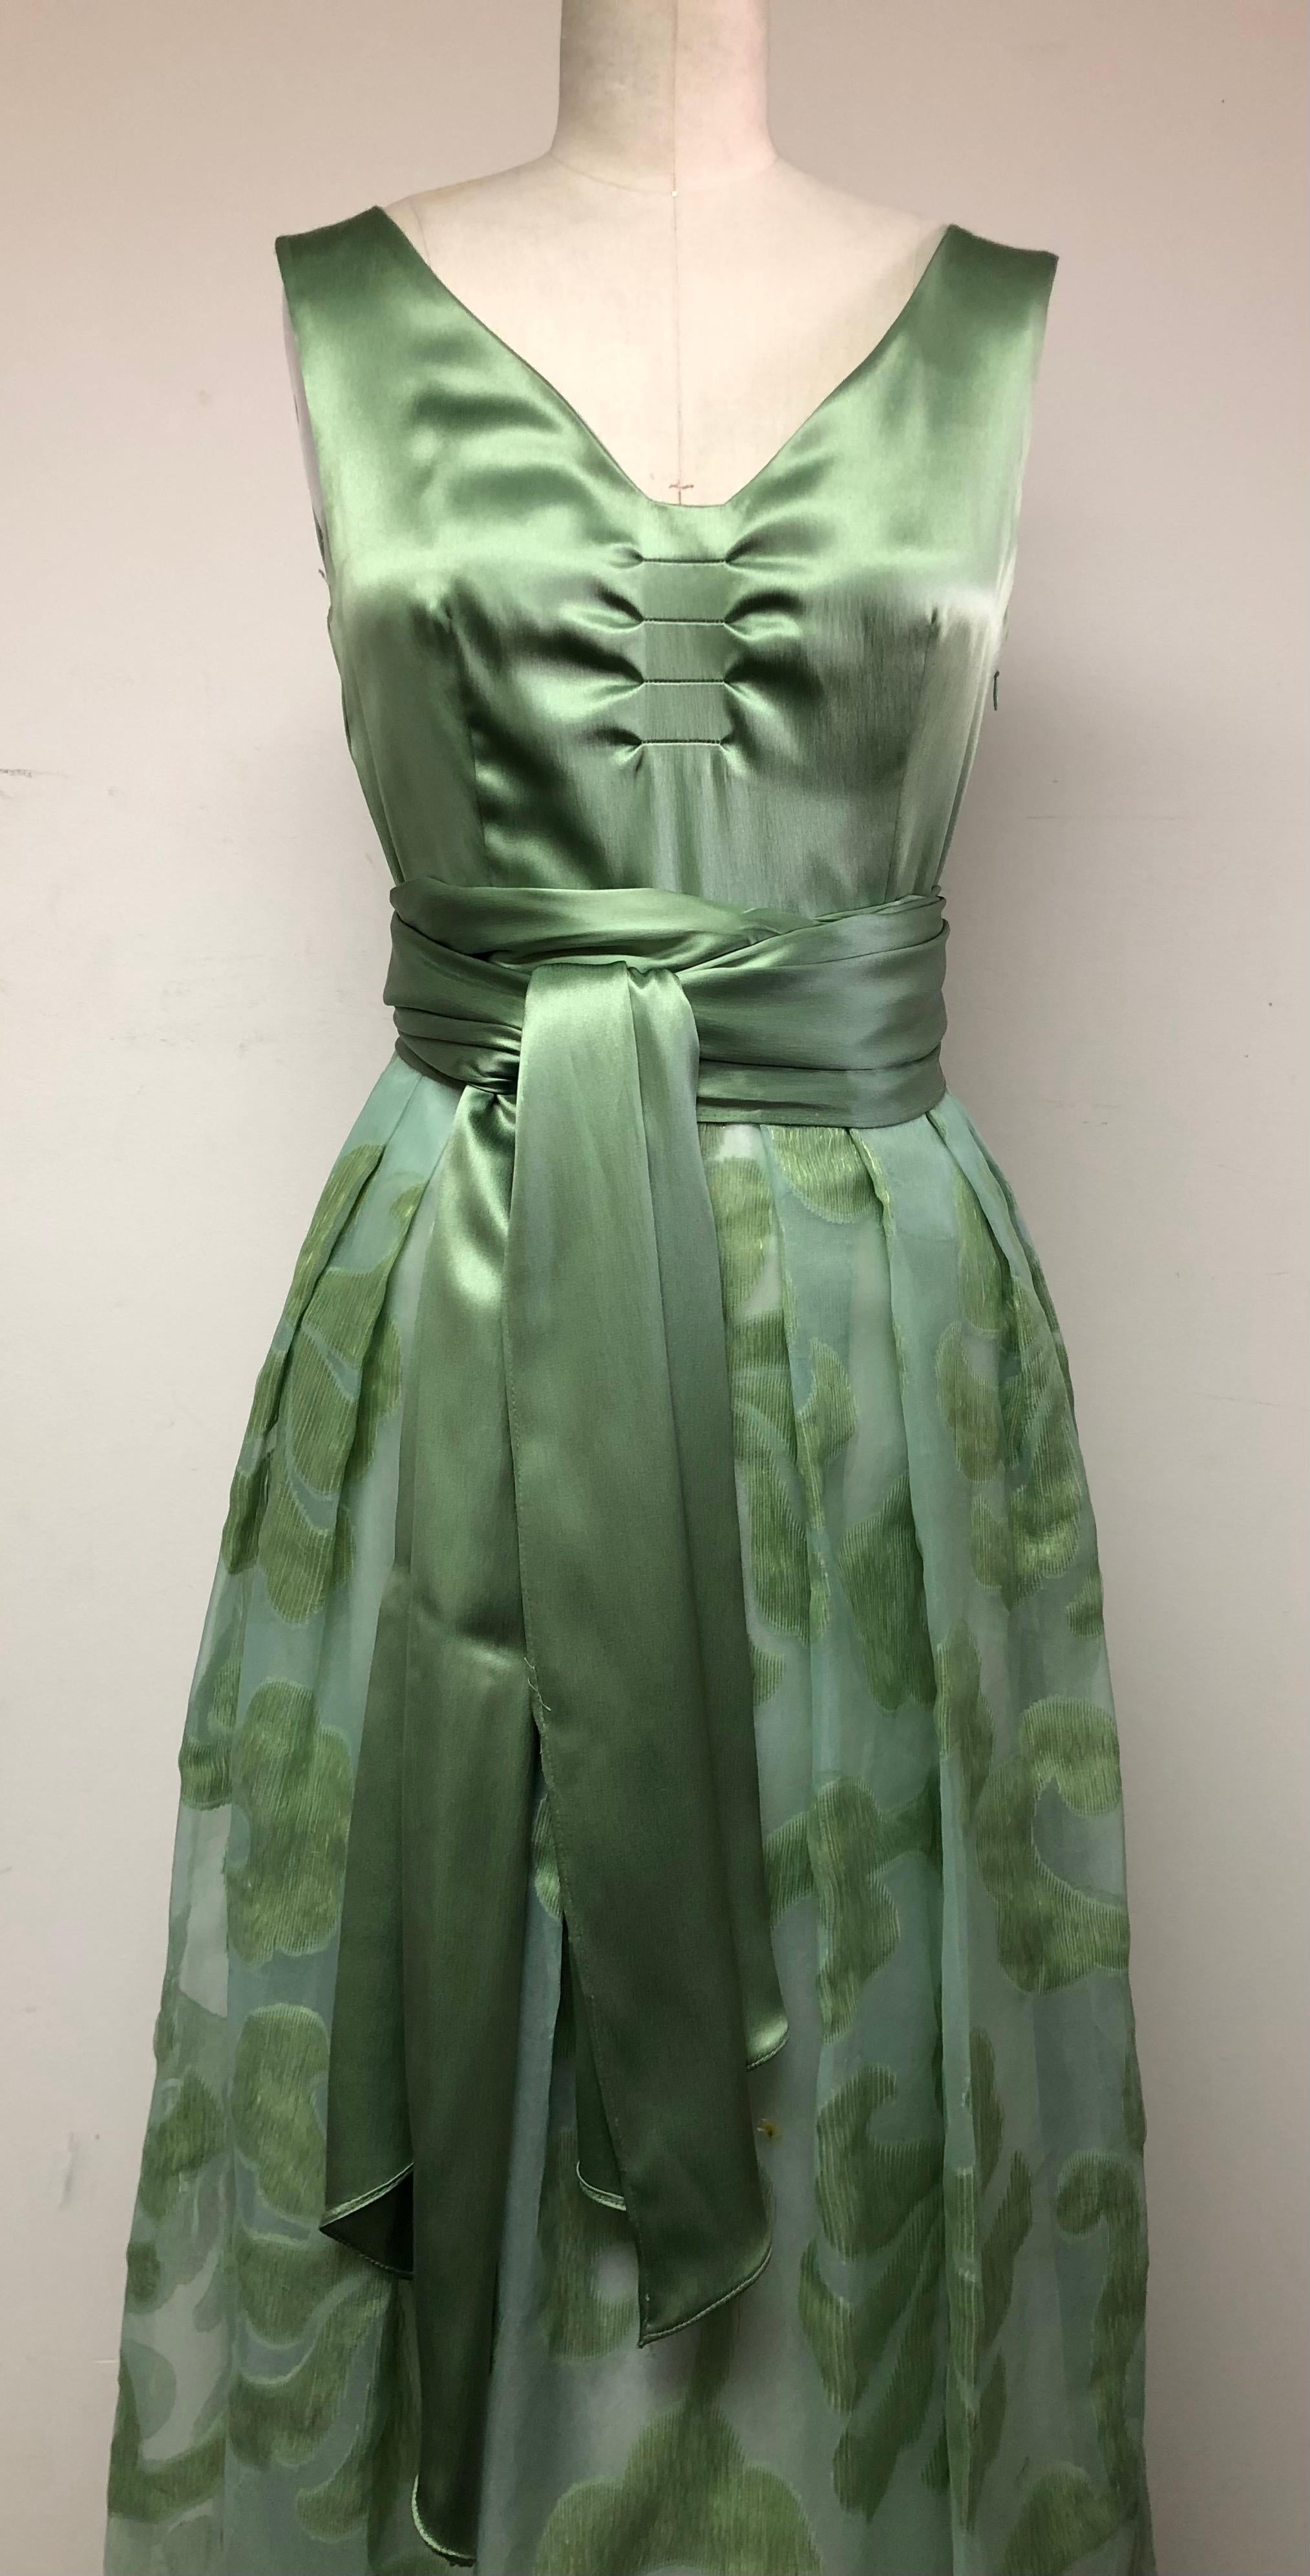 Sea Foam green Satin Tucked Bodice with Matching Sash and Fil Coupe Skirt make for 
statement making combo. In fact the dress was chosen to be featured in Van Cleef Arpels Ad
Campaign. Perfect for Mother of Bride or Groom, Wedding Guest, Spring